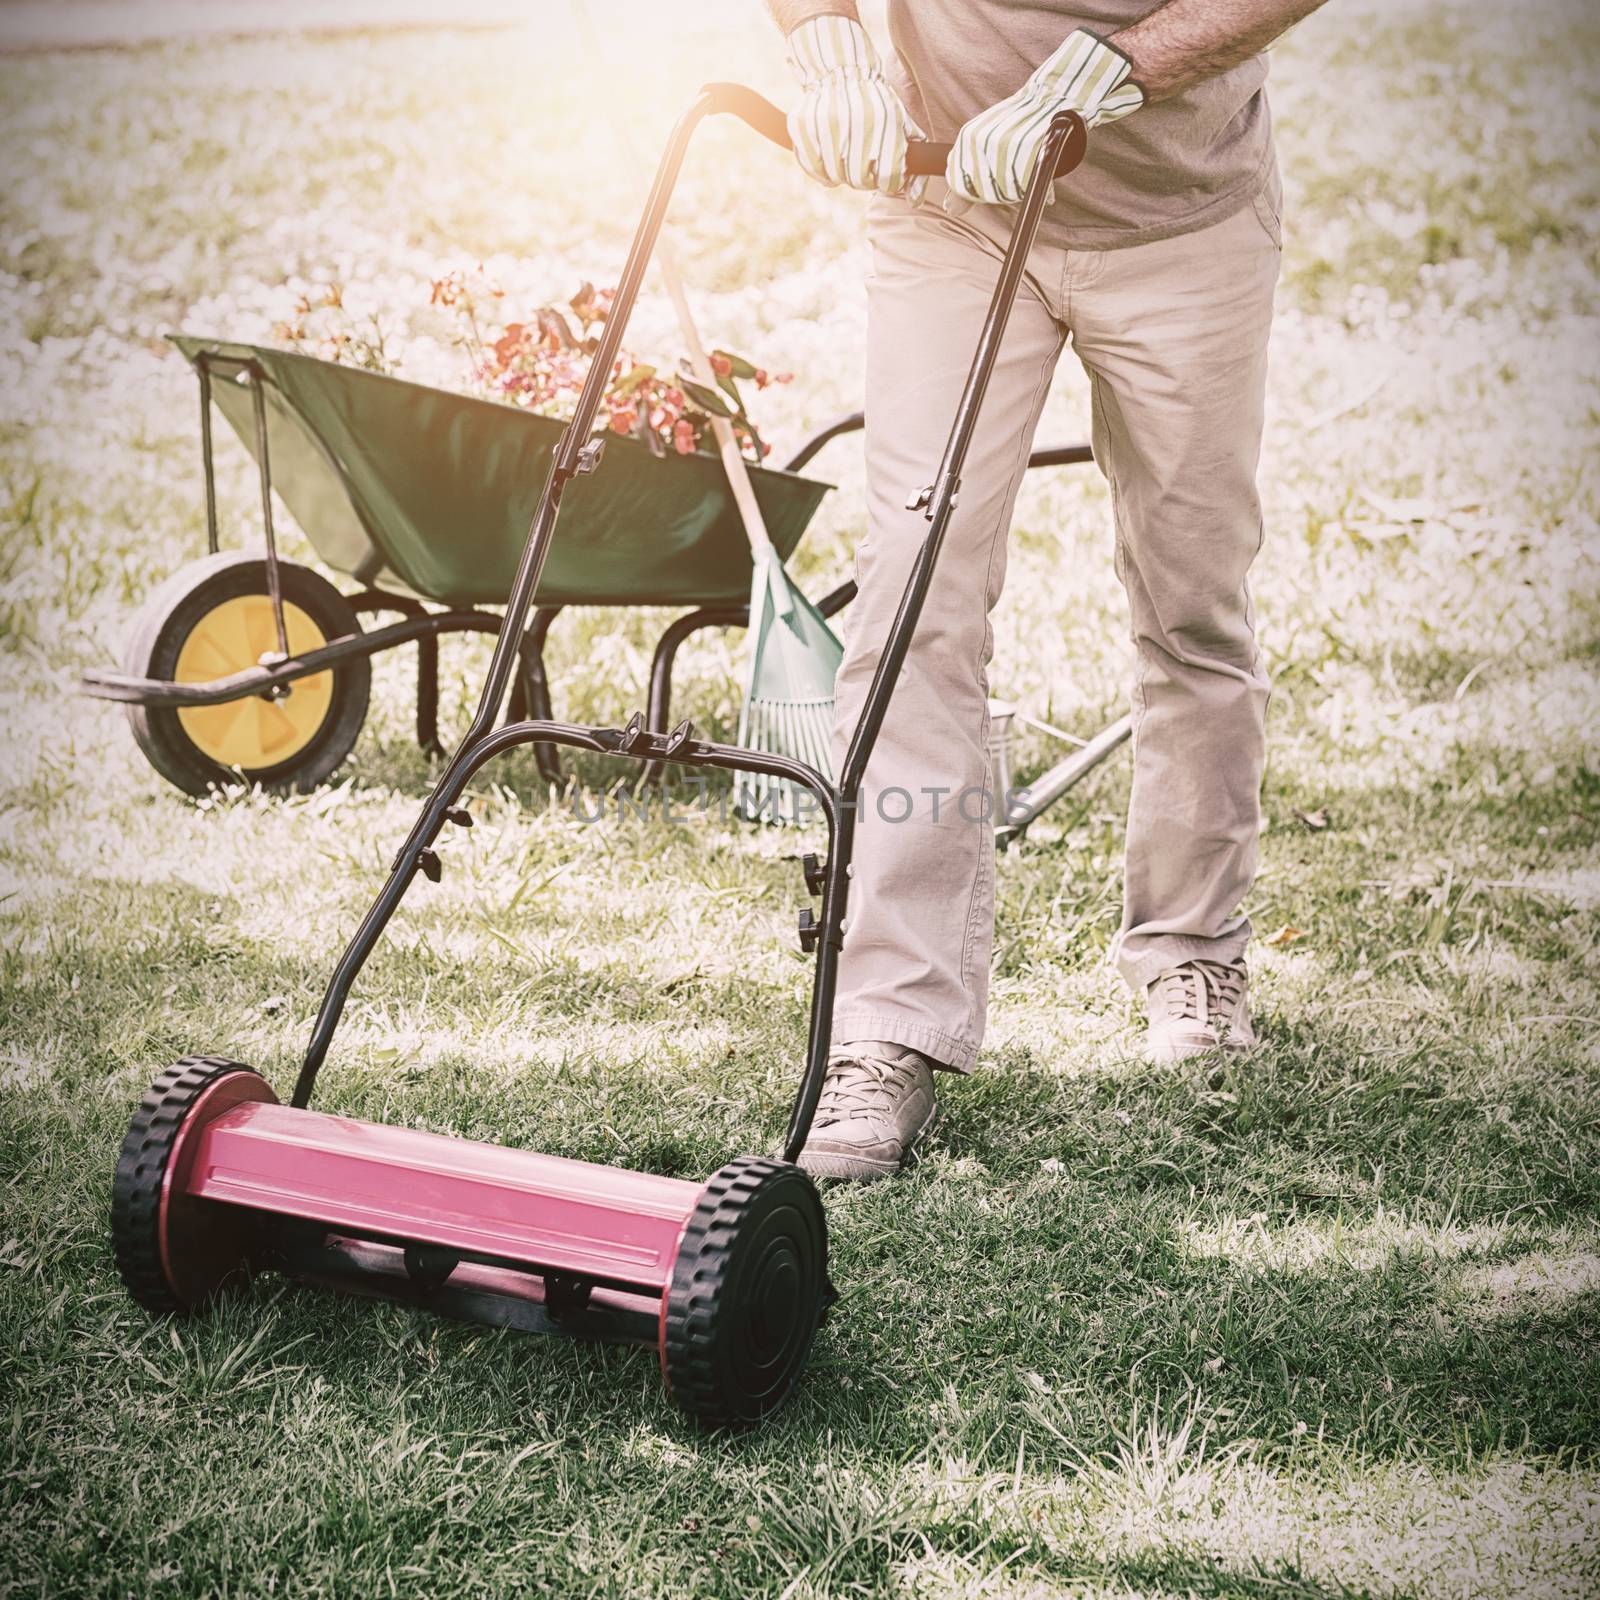 Full length portrait of a smiling man mowing the lawn